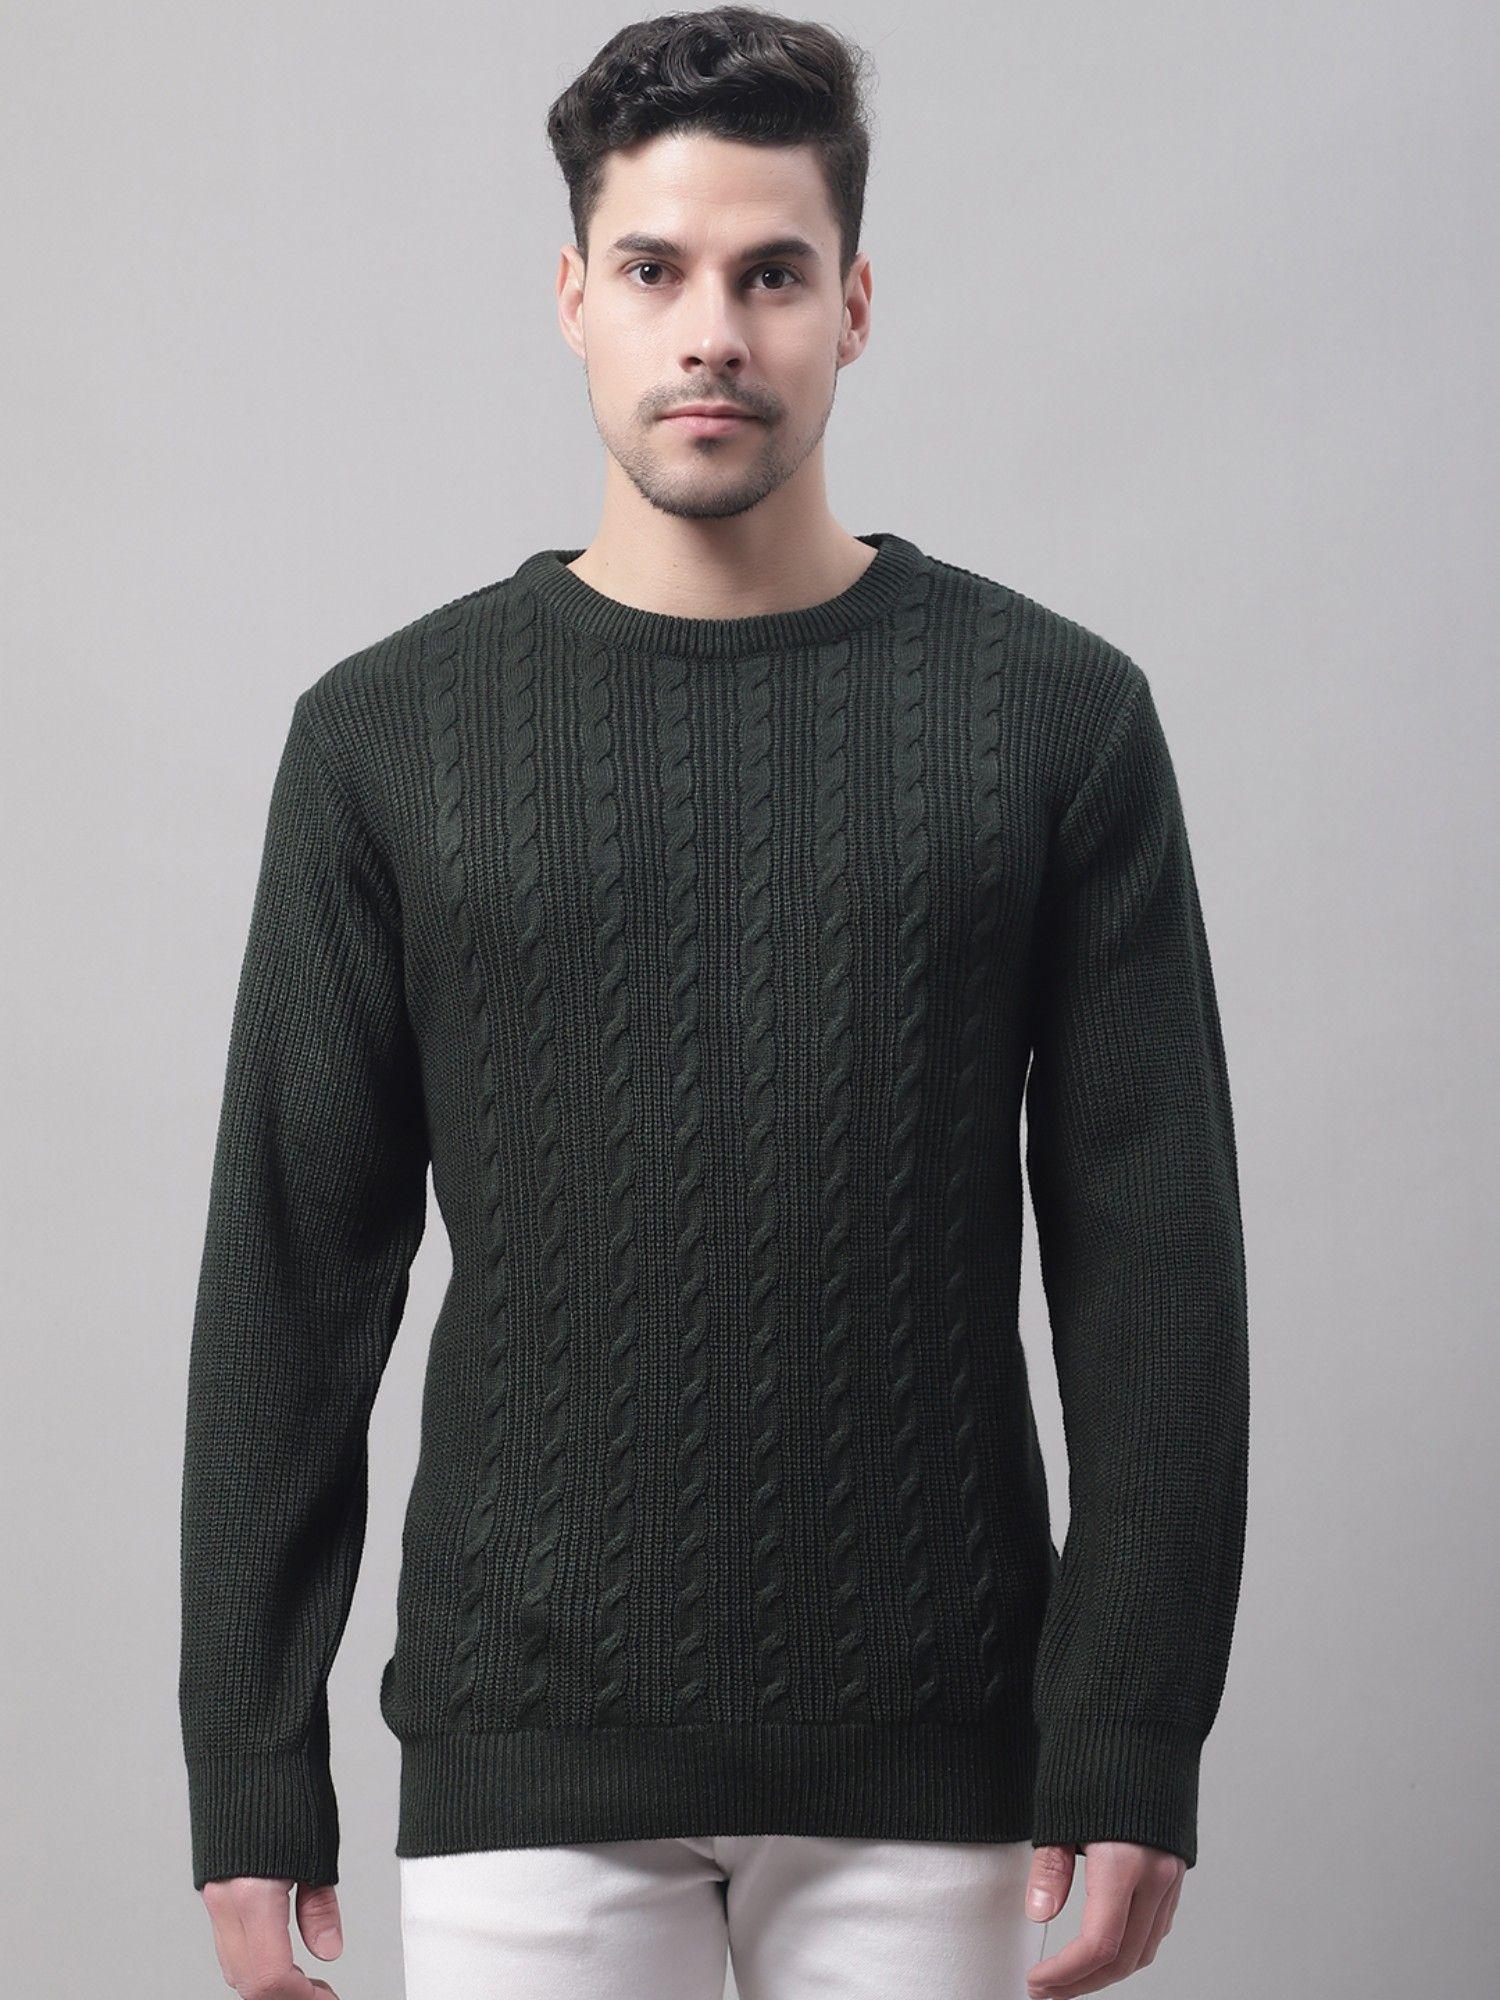 woven olive sweater for men